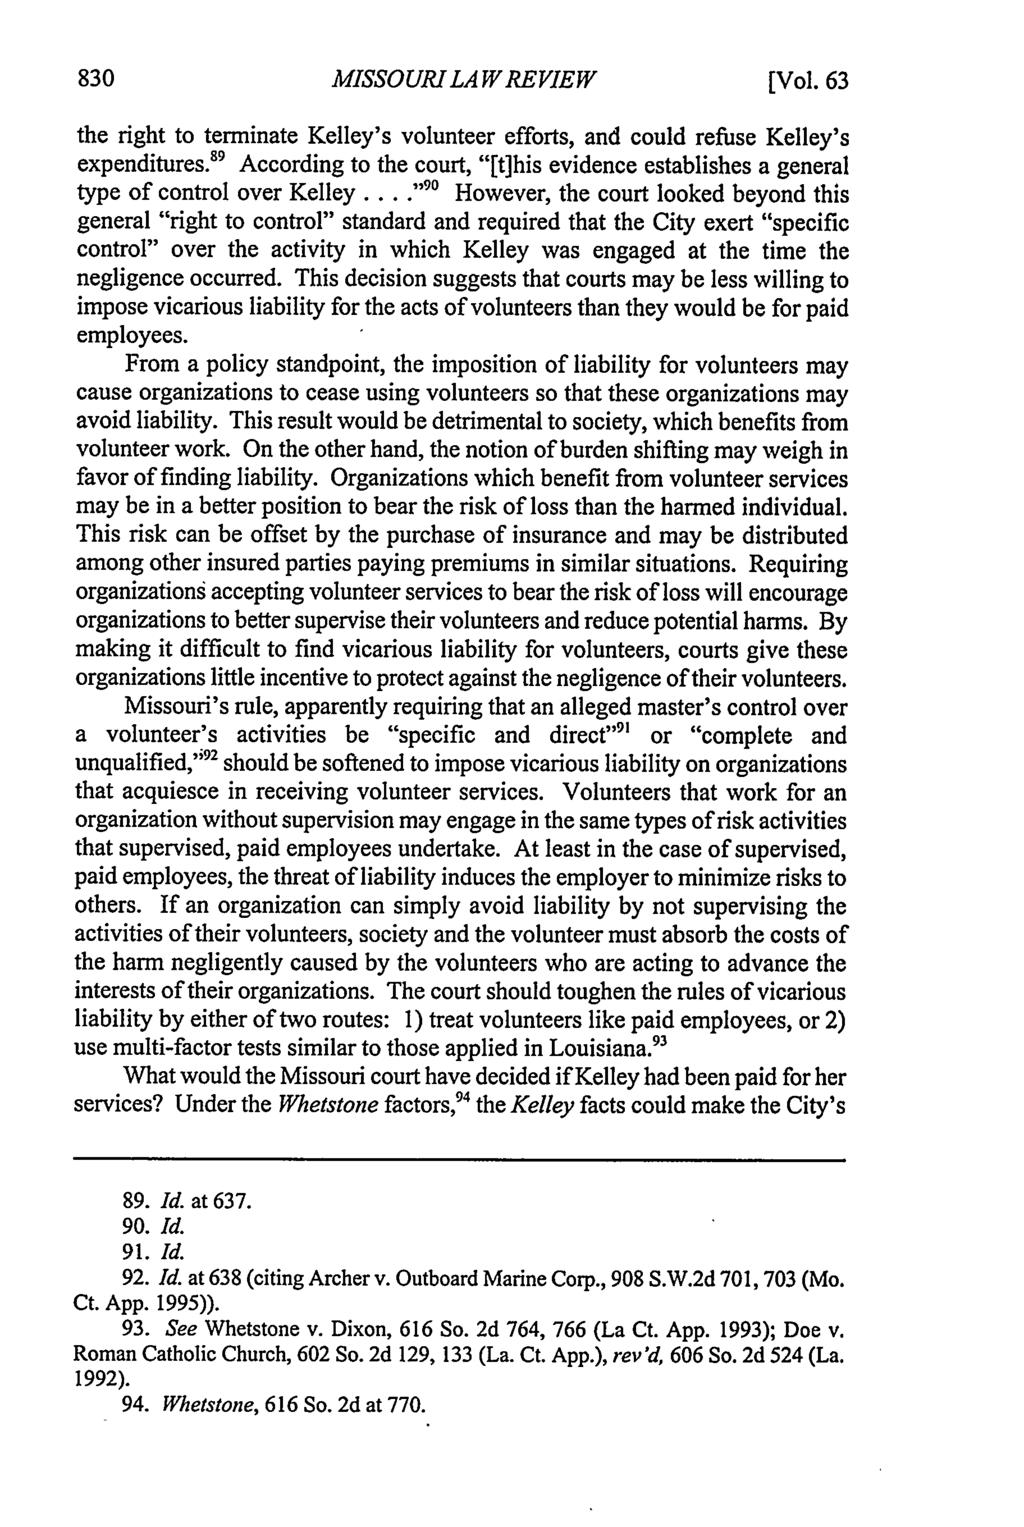 Missouri Law Review, Vol. 63, Iss. 3 [1998], Art. 7 MISSOURI LA WREVIEW [Vol. 63 the right to terminate Kelley's volunteer efforts, and could refuse Kelley's expenditures.